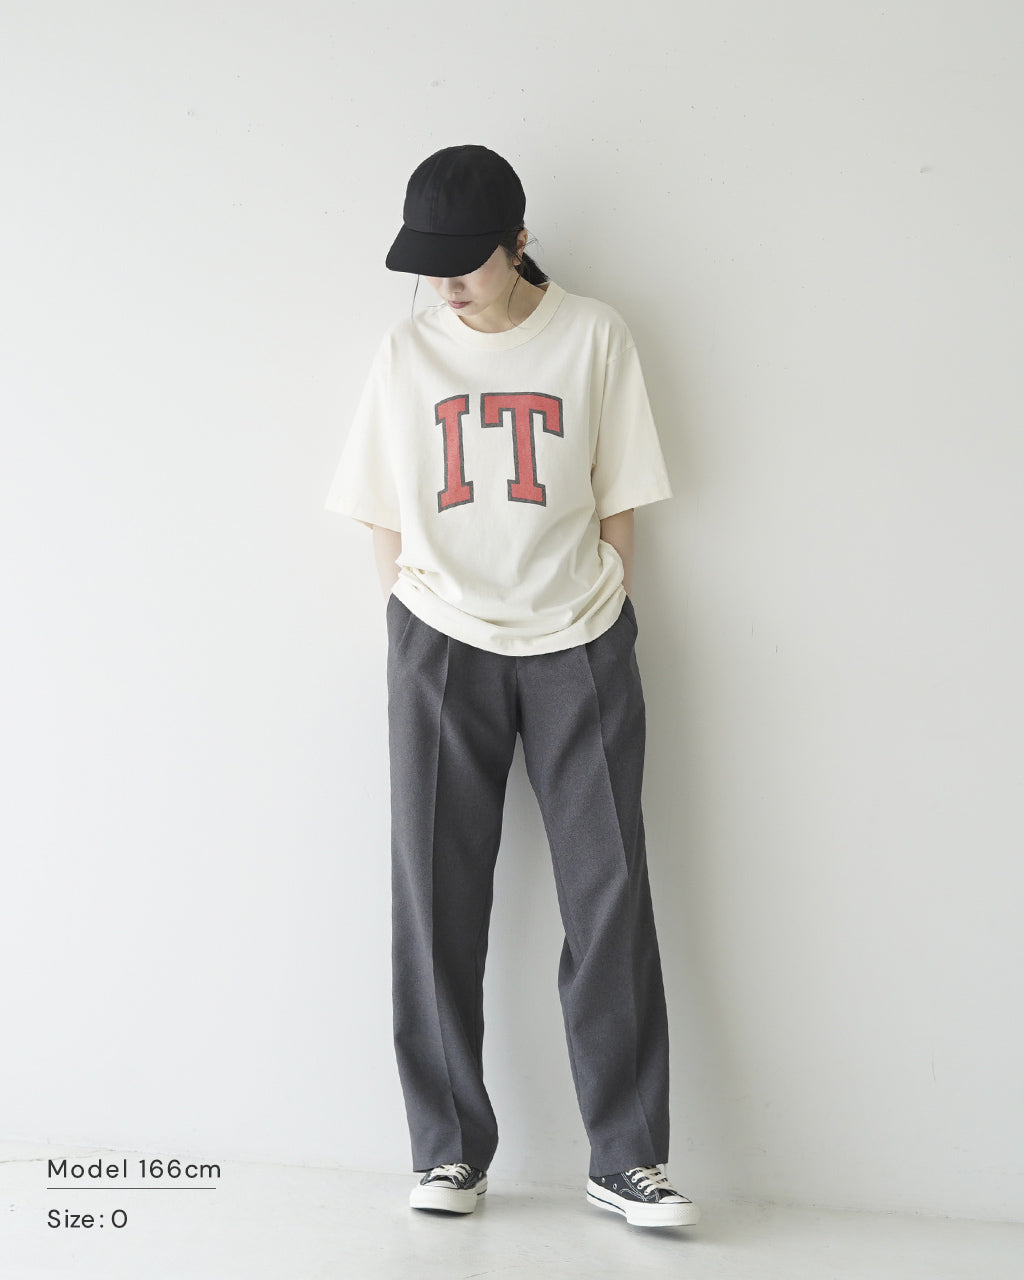 blurhms ROOTSTOCK ブラームス ルーツストック 88/12 プリント Tシャツ Cotton Rayon 88/12 Print Tee IT-M bROOTS23S32【送料無料】